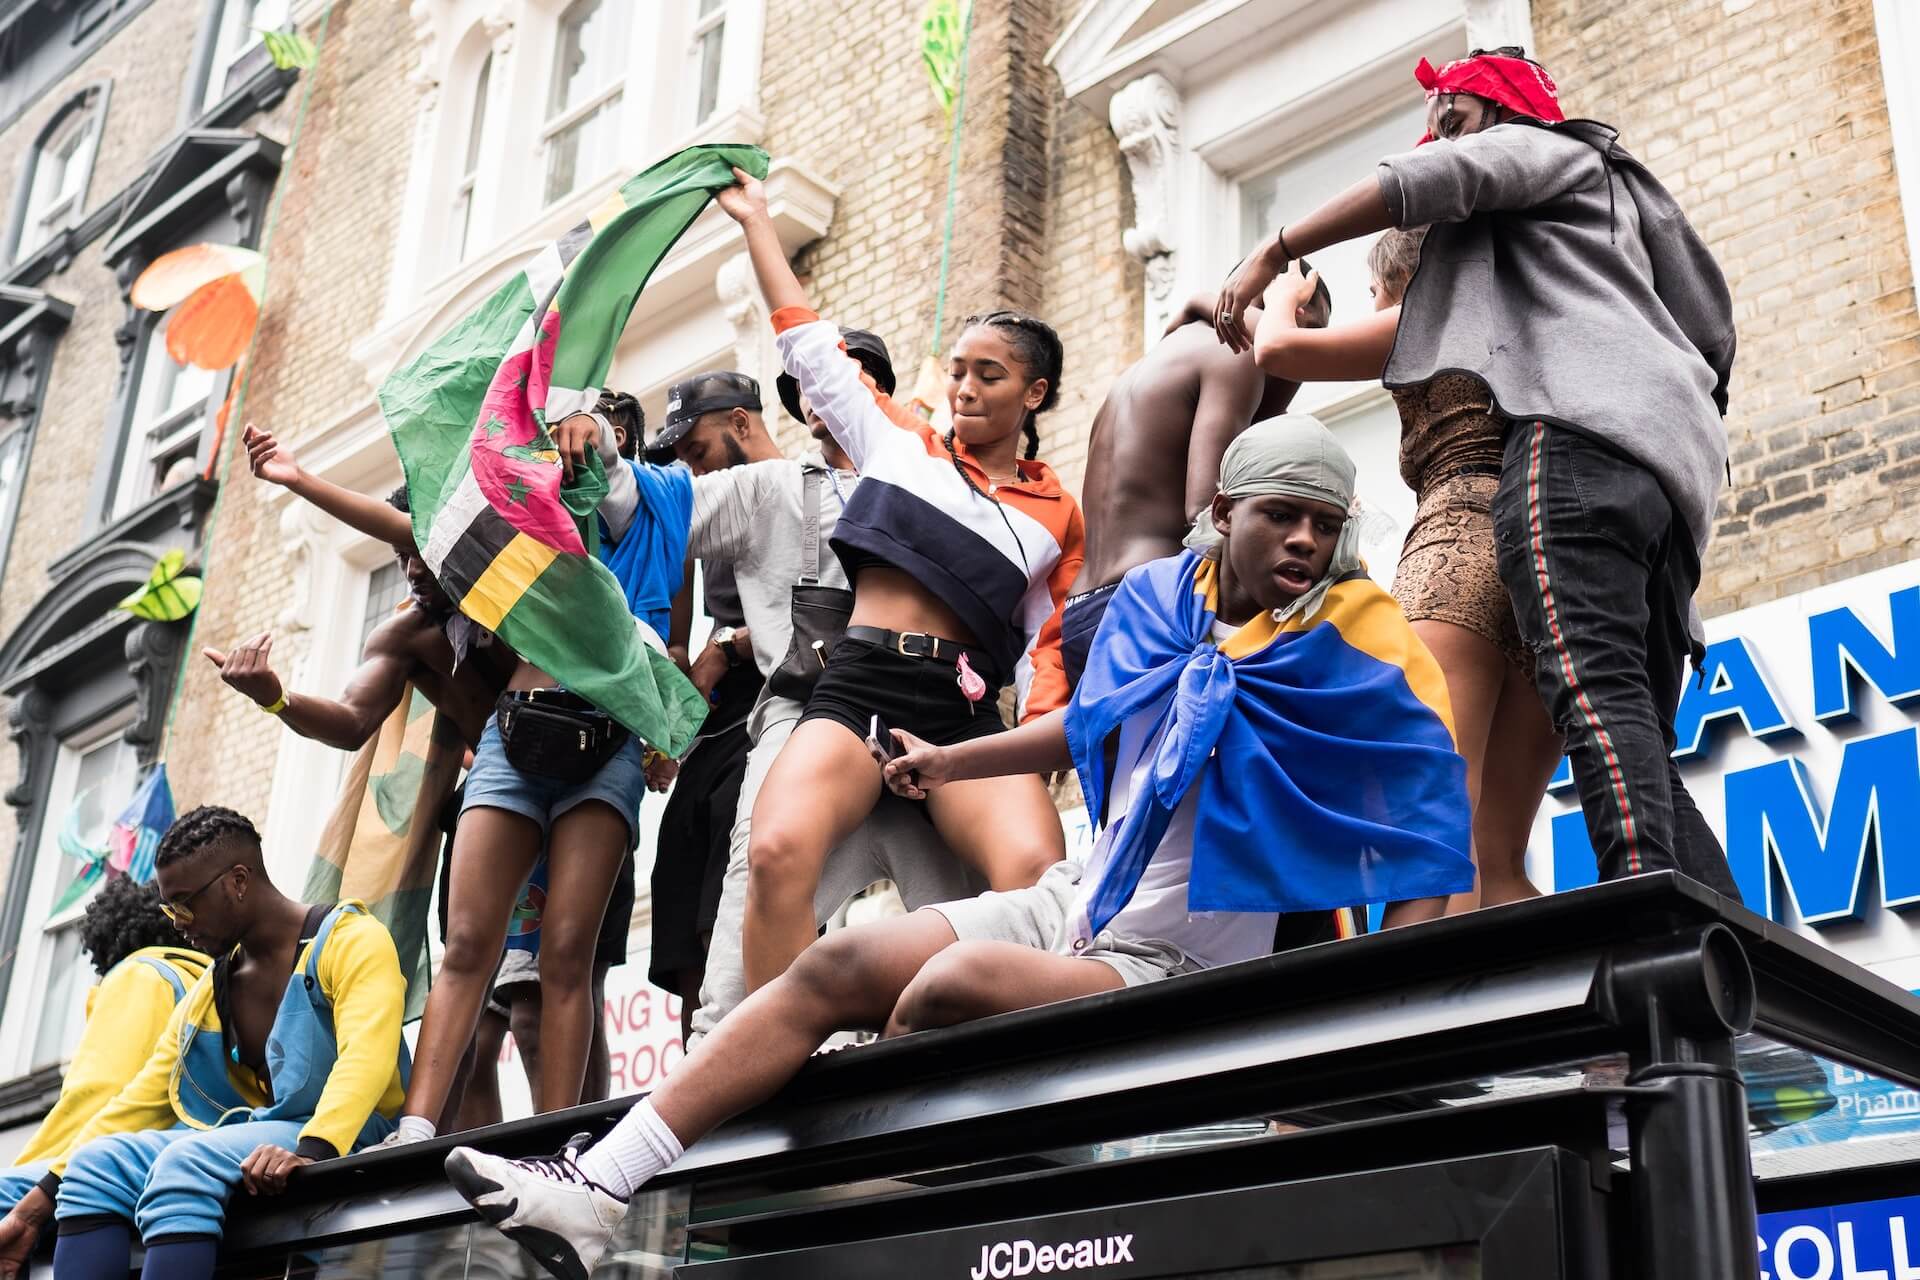 7. Check out Notting Hill Carnival